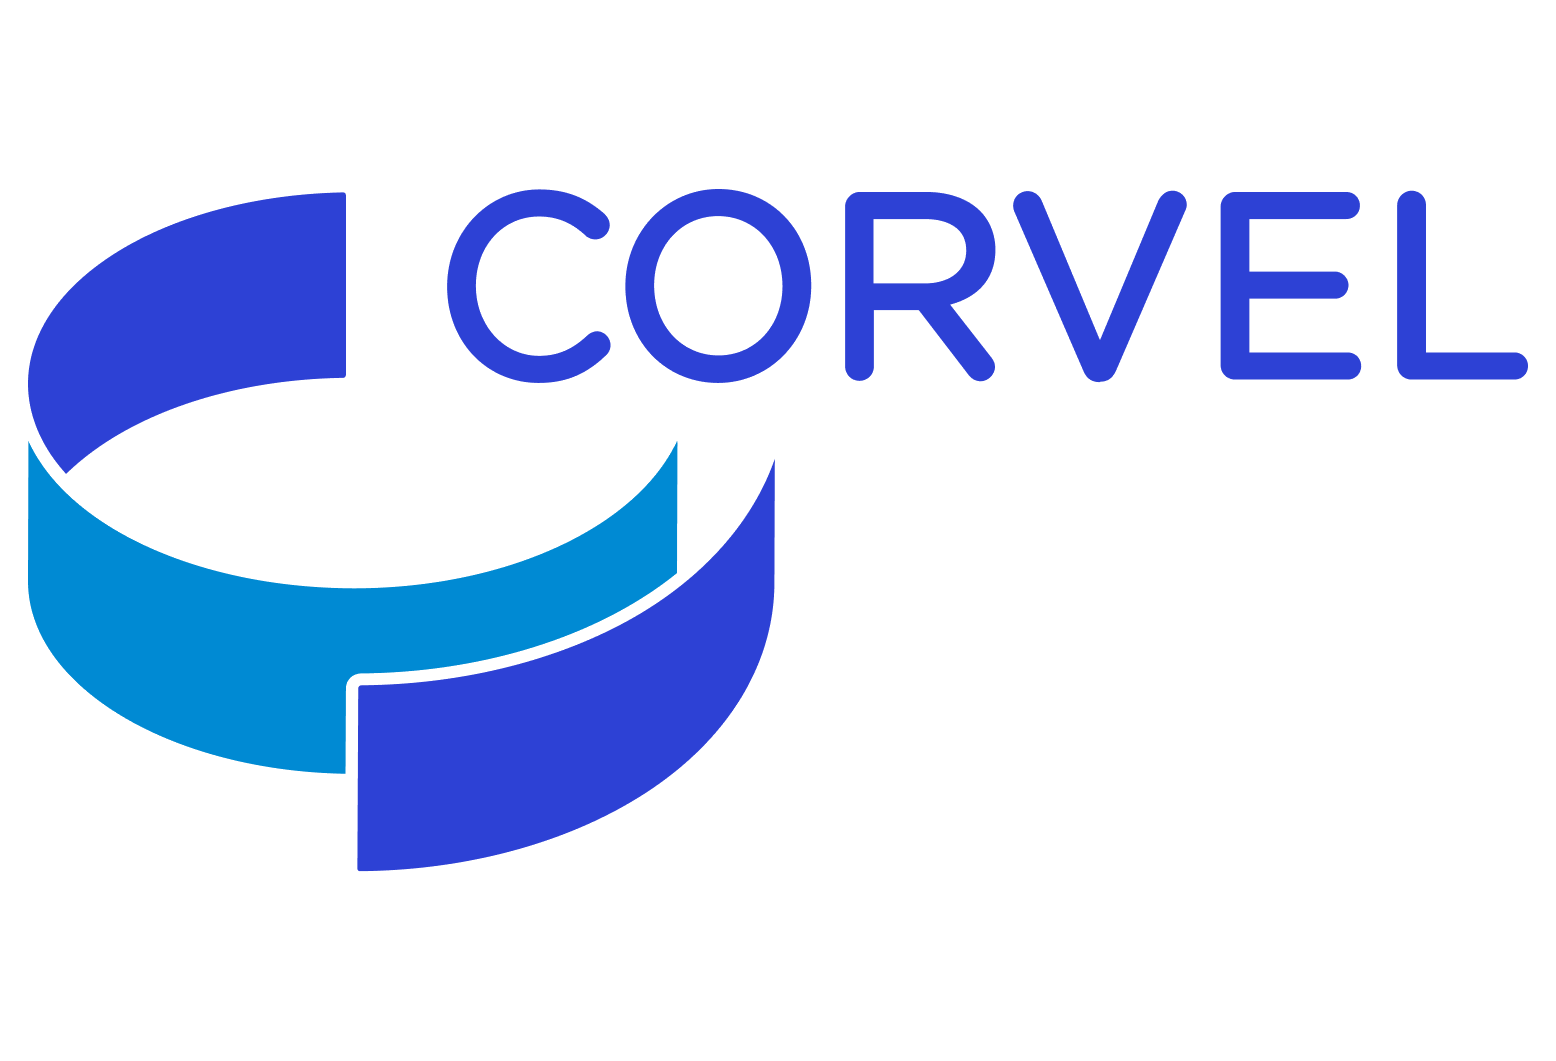 CorVel_Primary-Logo_Full Color (3x) - Transparrent.png